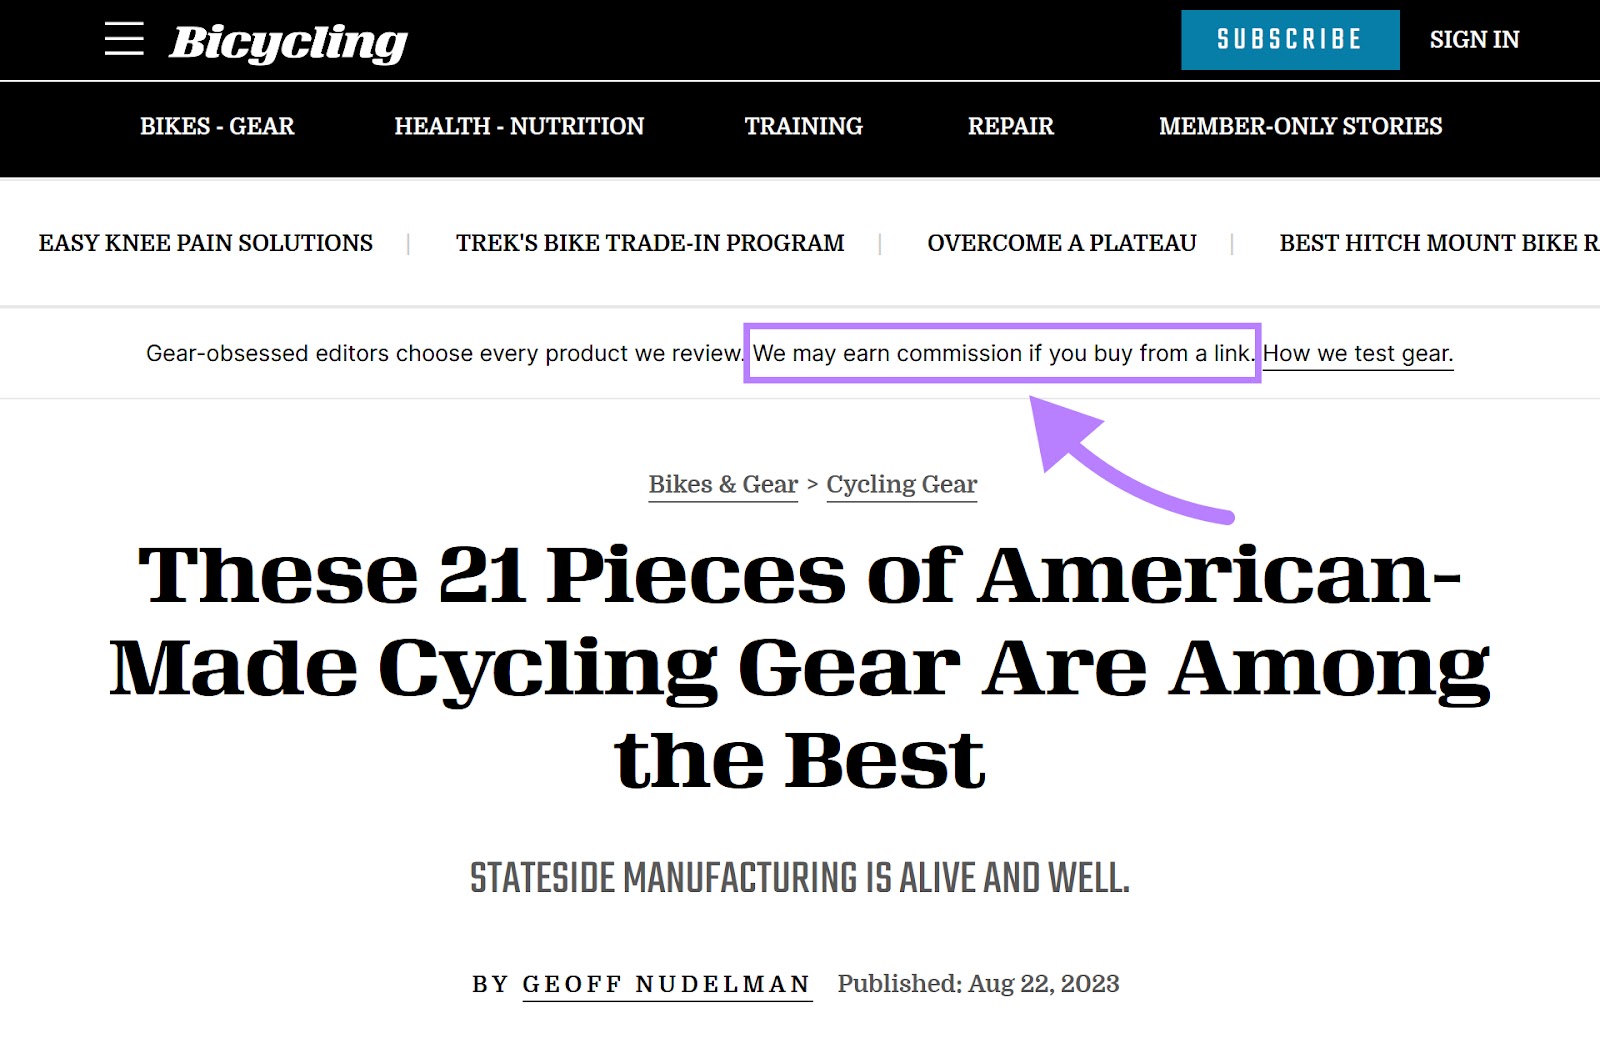 "We may earn commission if you buy from a link" message highlighted on Bicycling magazine site